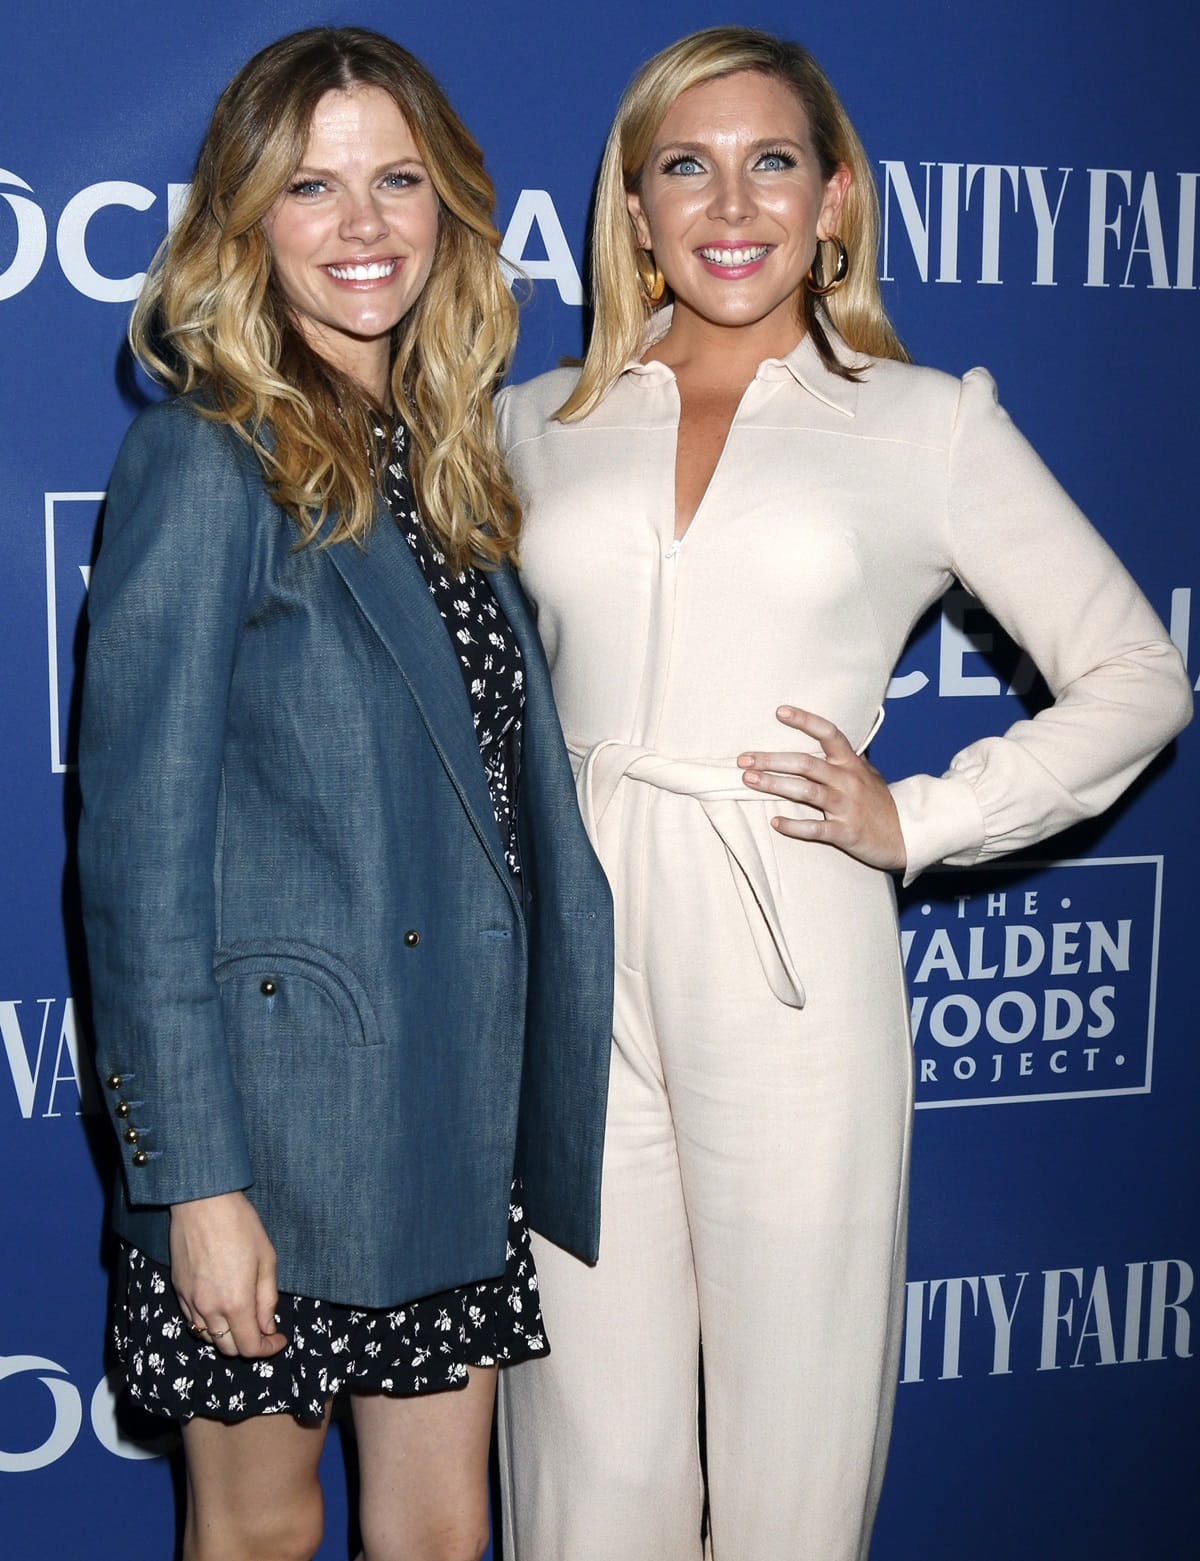 Brooklyn Decker stands slightly taller at 5ft 9 (175.3 cm) compared to June Diane Raphael's height of 5ft 8 ½ (174 cm)